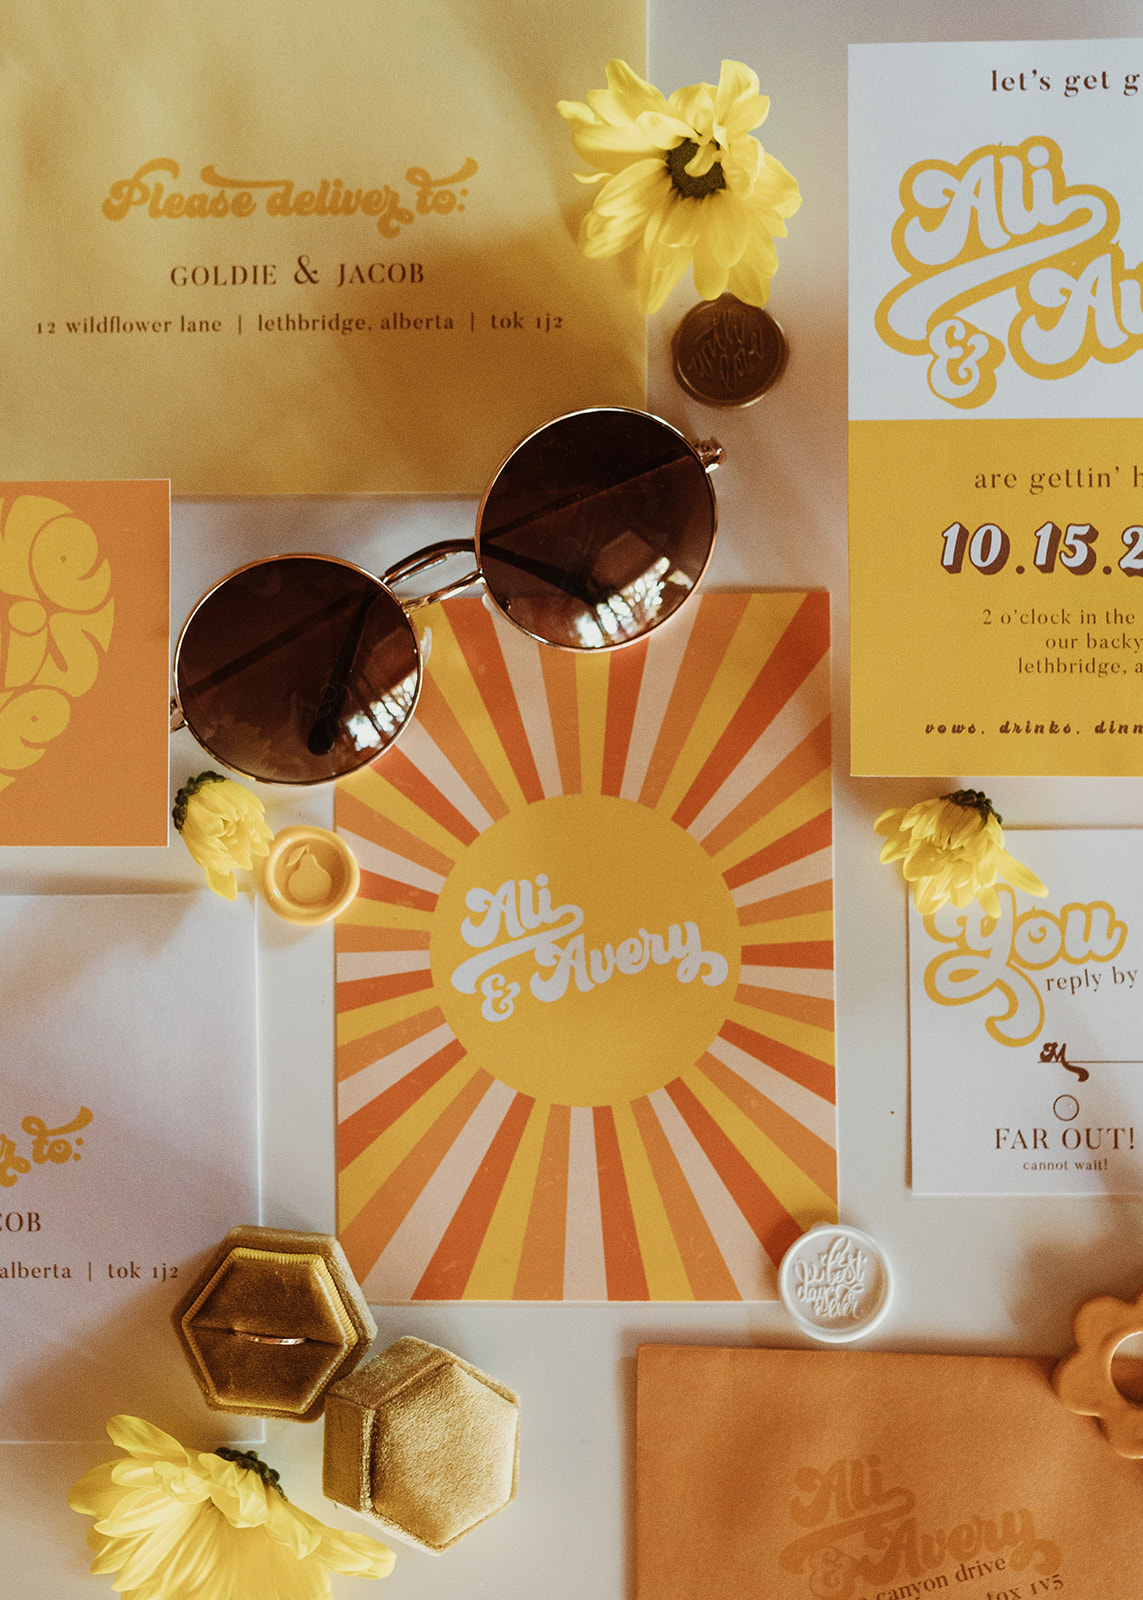 Groovy retro inspired yellow and tangerine wedding day stationery and invitation suite